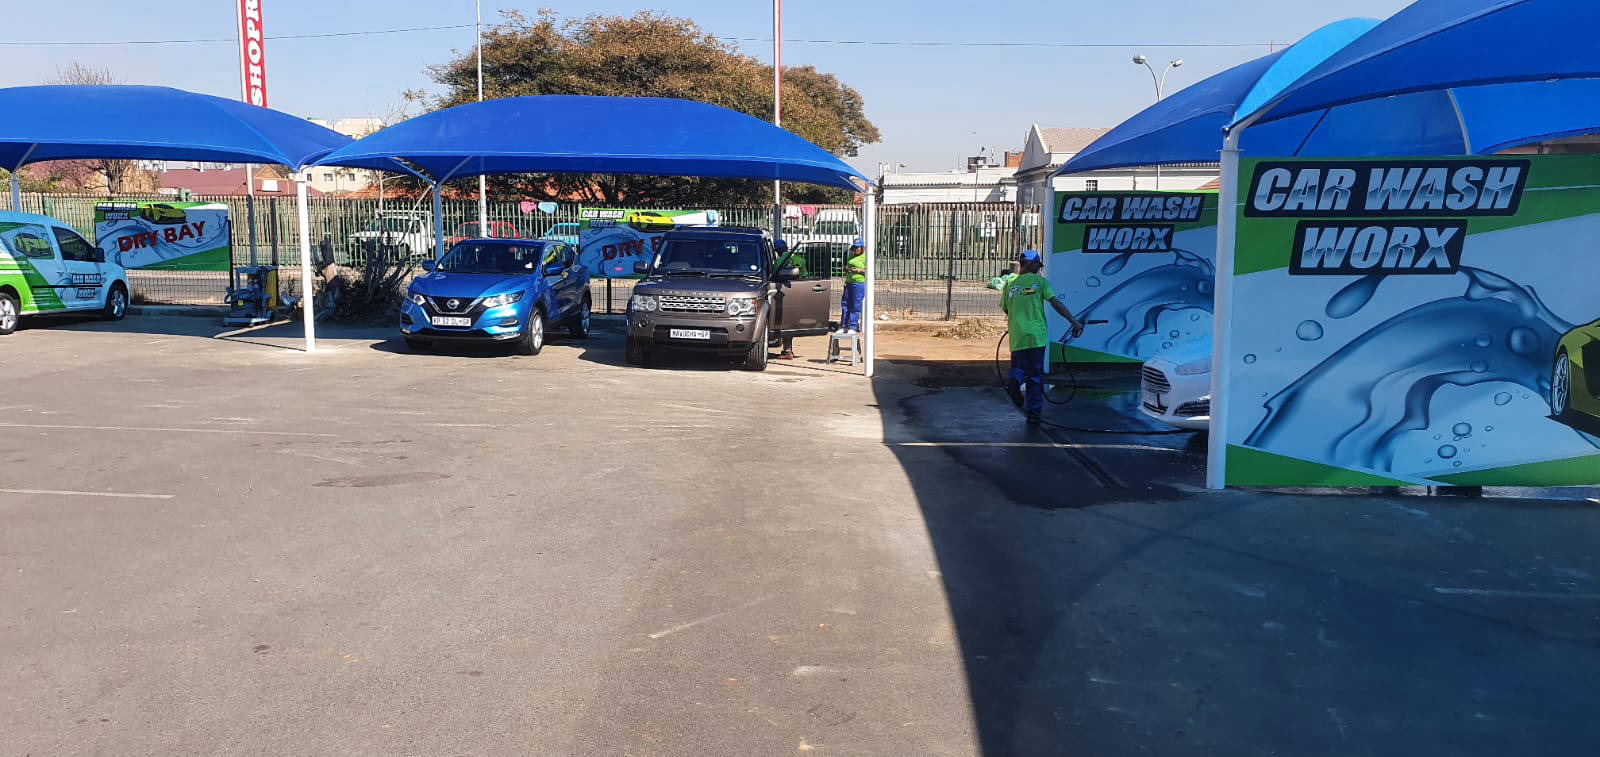 CarWash Worx Brakpan Branch, Car Wash Franchises Available, CarWash Worx Head Office, Join The Leading Car Wash Franchising Group, Start Your Own Successful Car Wash Business Now